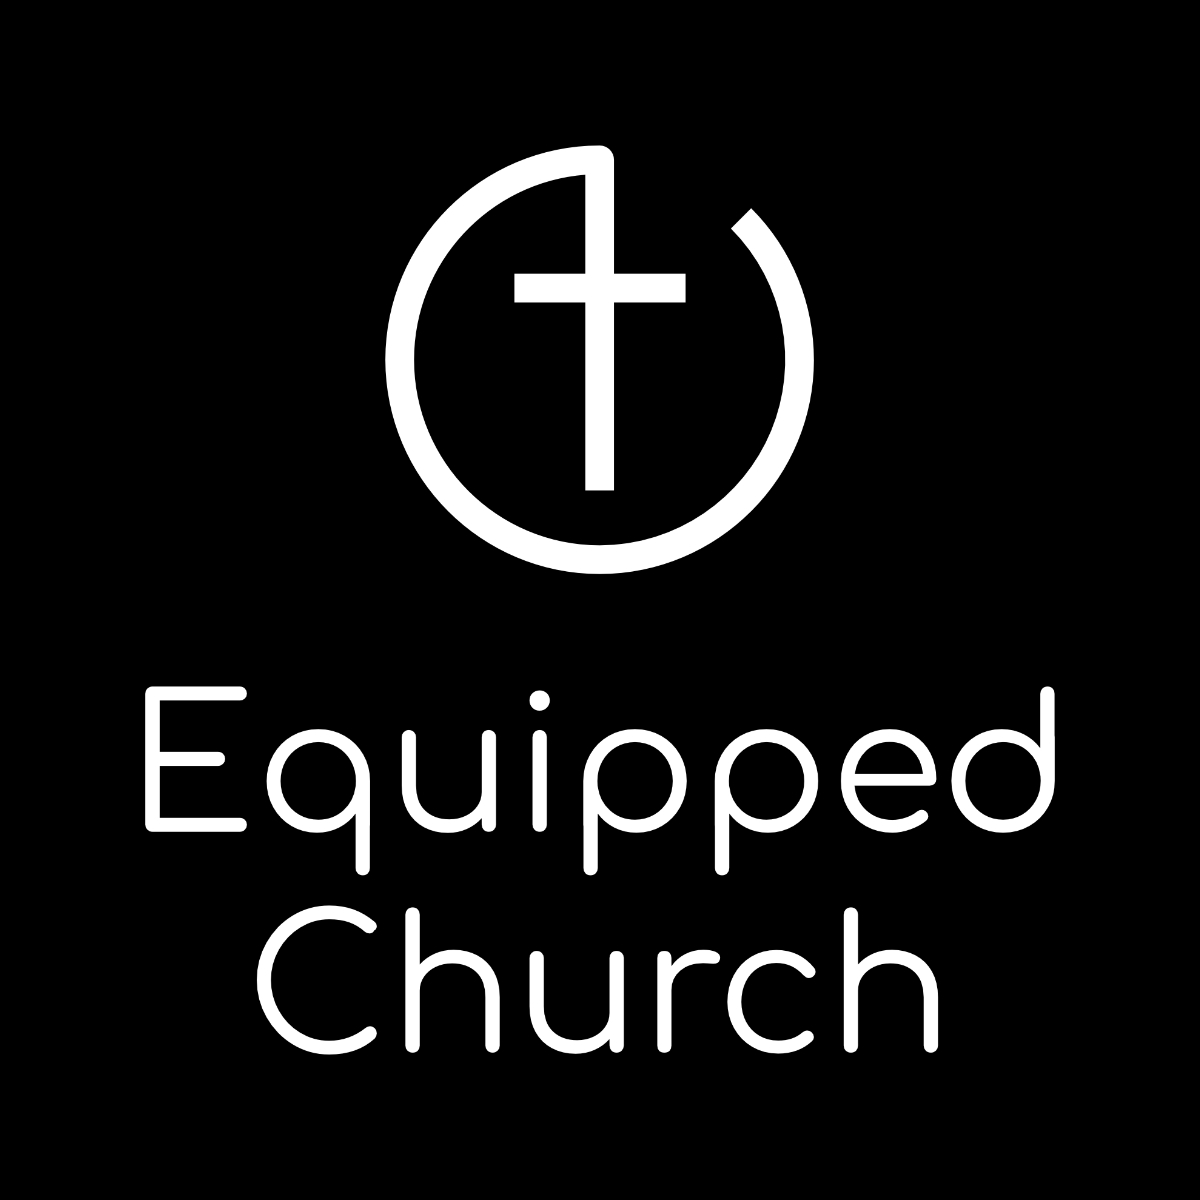 Equipped Church | 23 Inverness Way E, Englewood, CO 80112, United States | Phone: (720) 254-1580